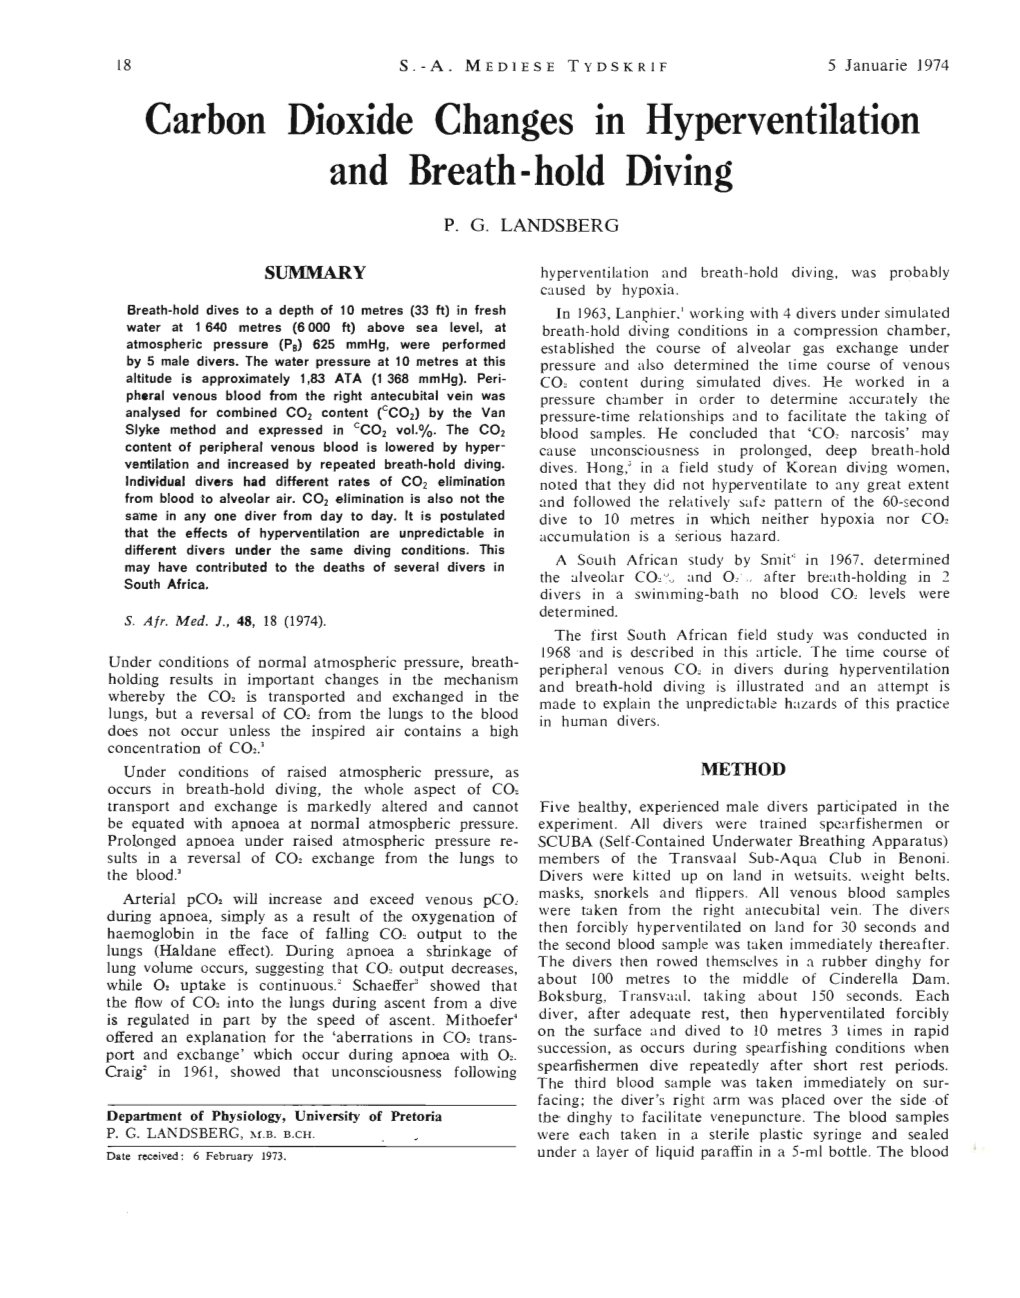 Carbon Dioxide Changes in Hyperventilation and Breath-Hold